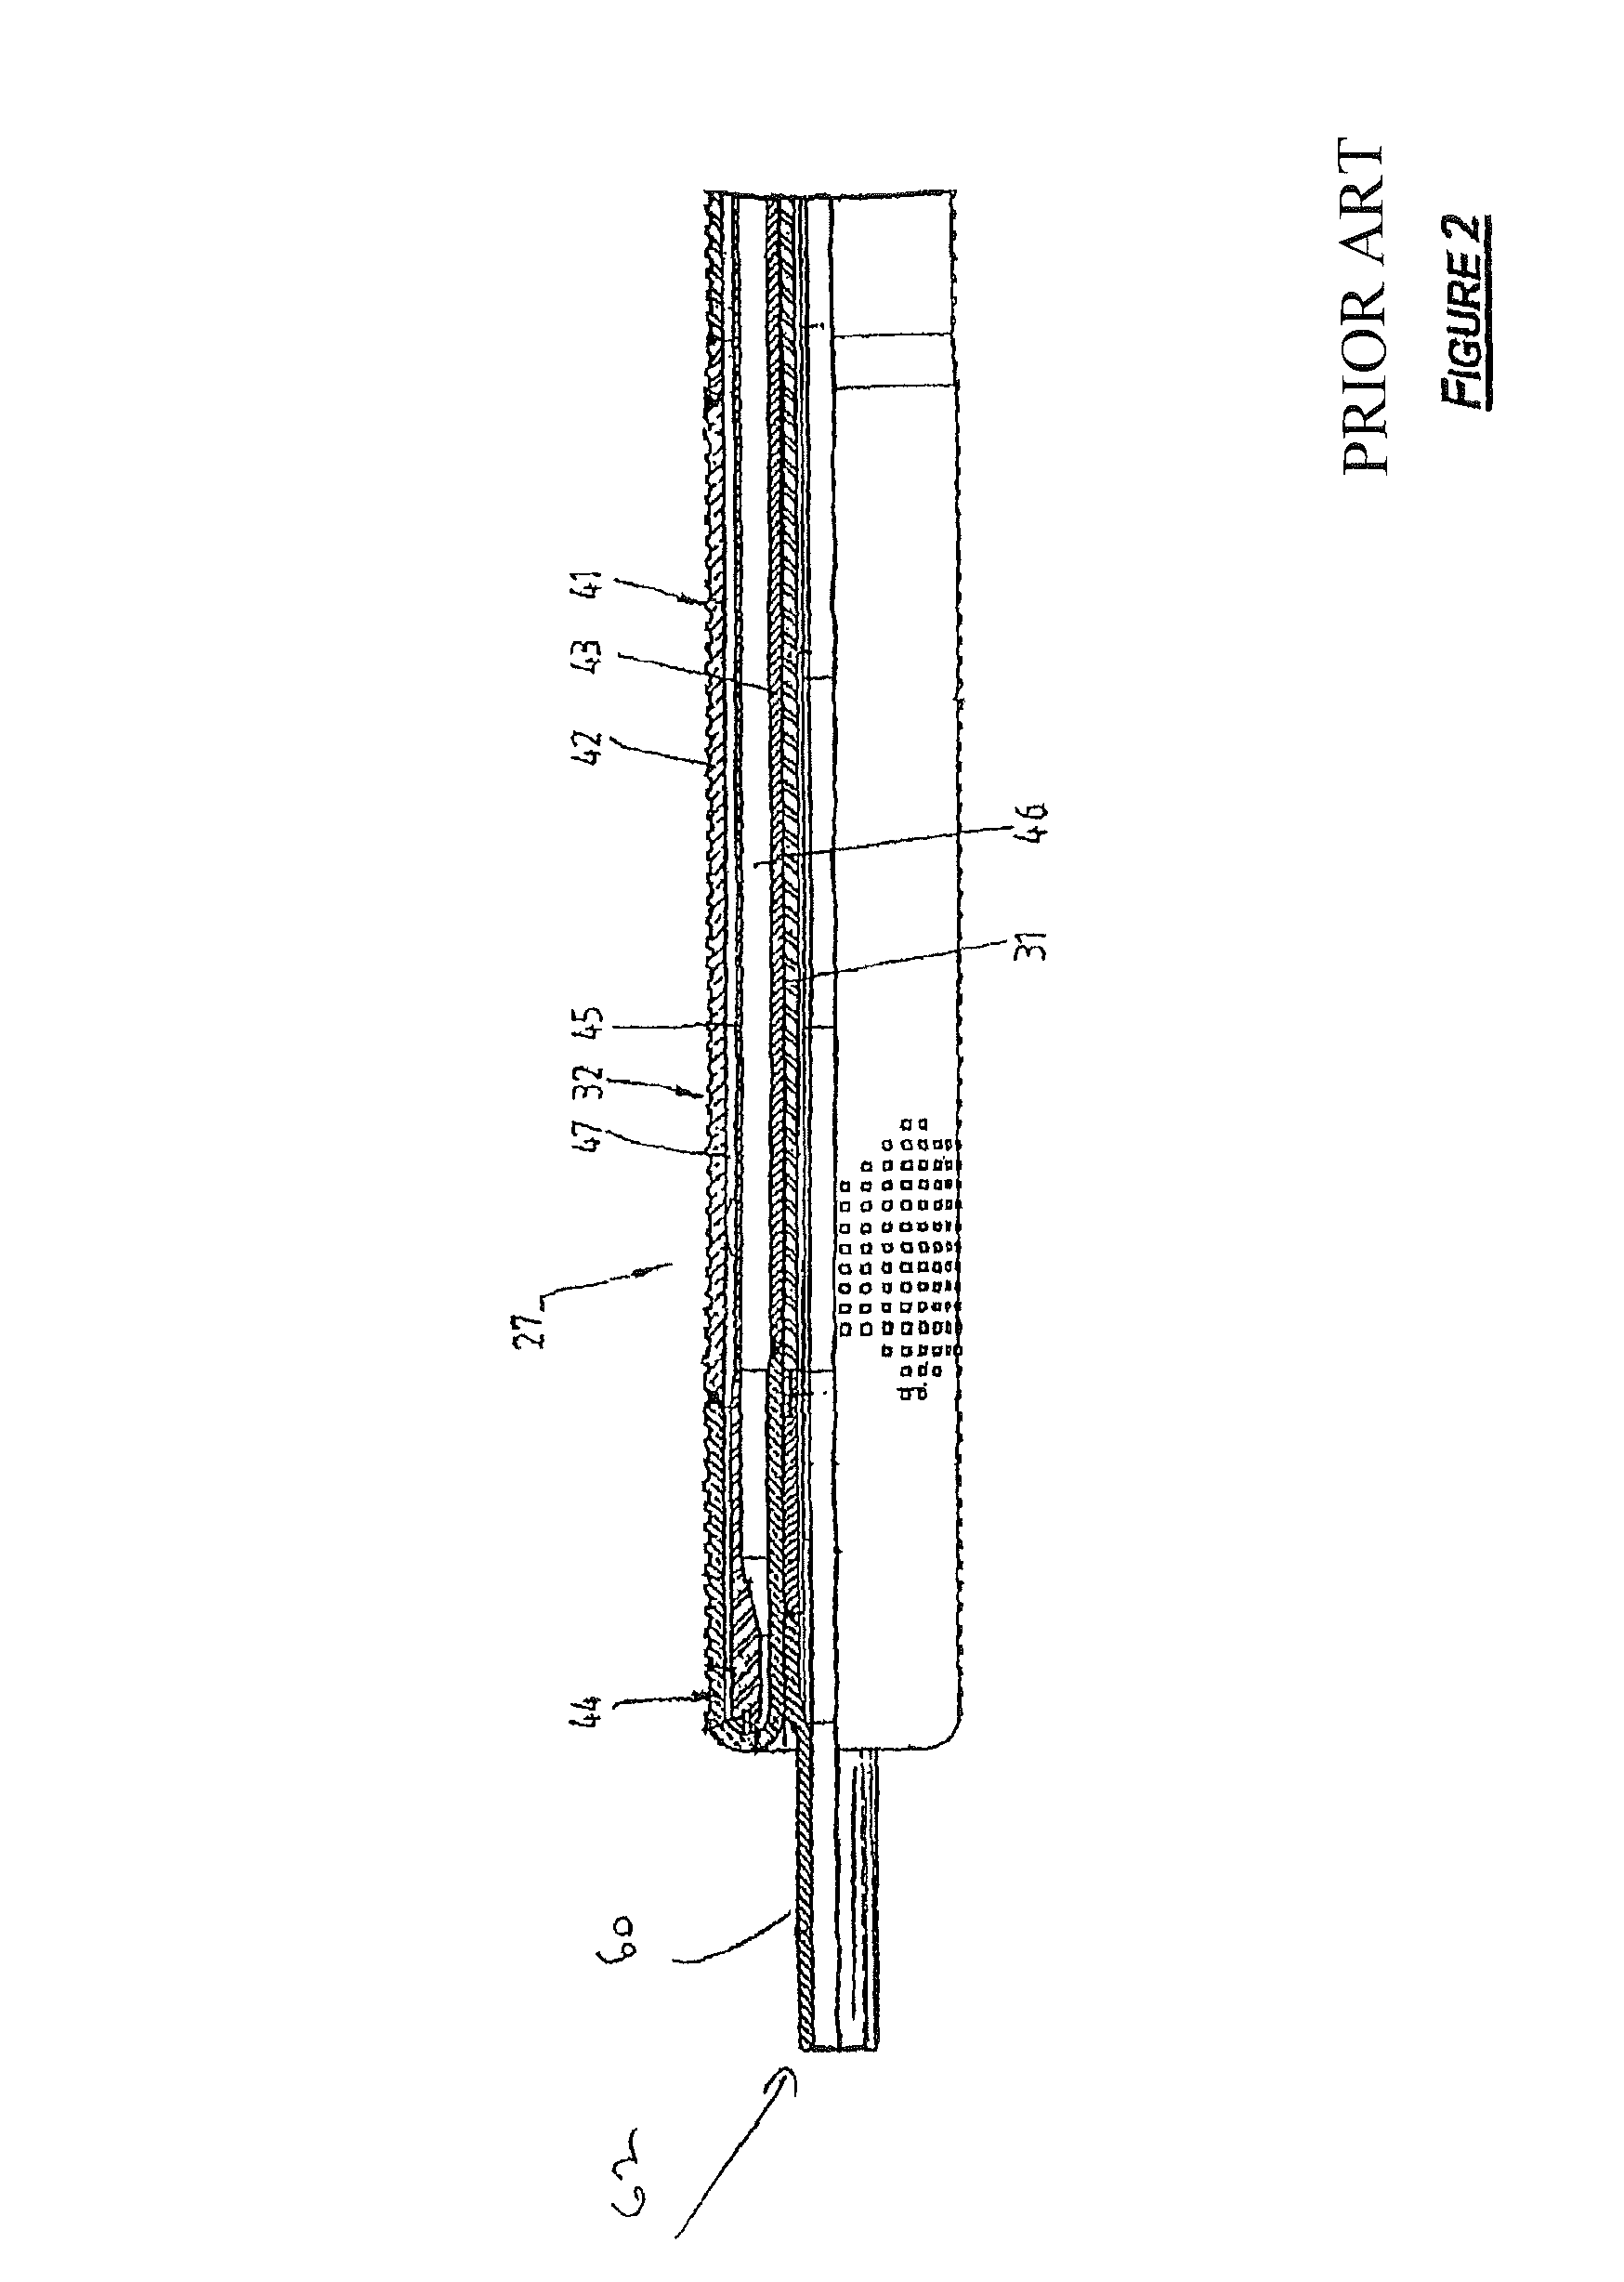 Lance for injecting solid material into a vessel